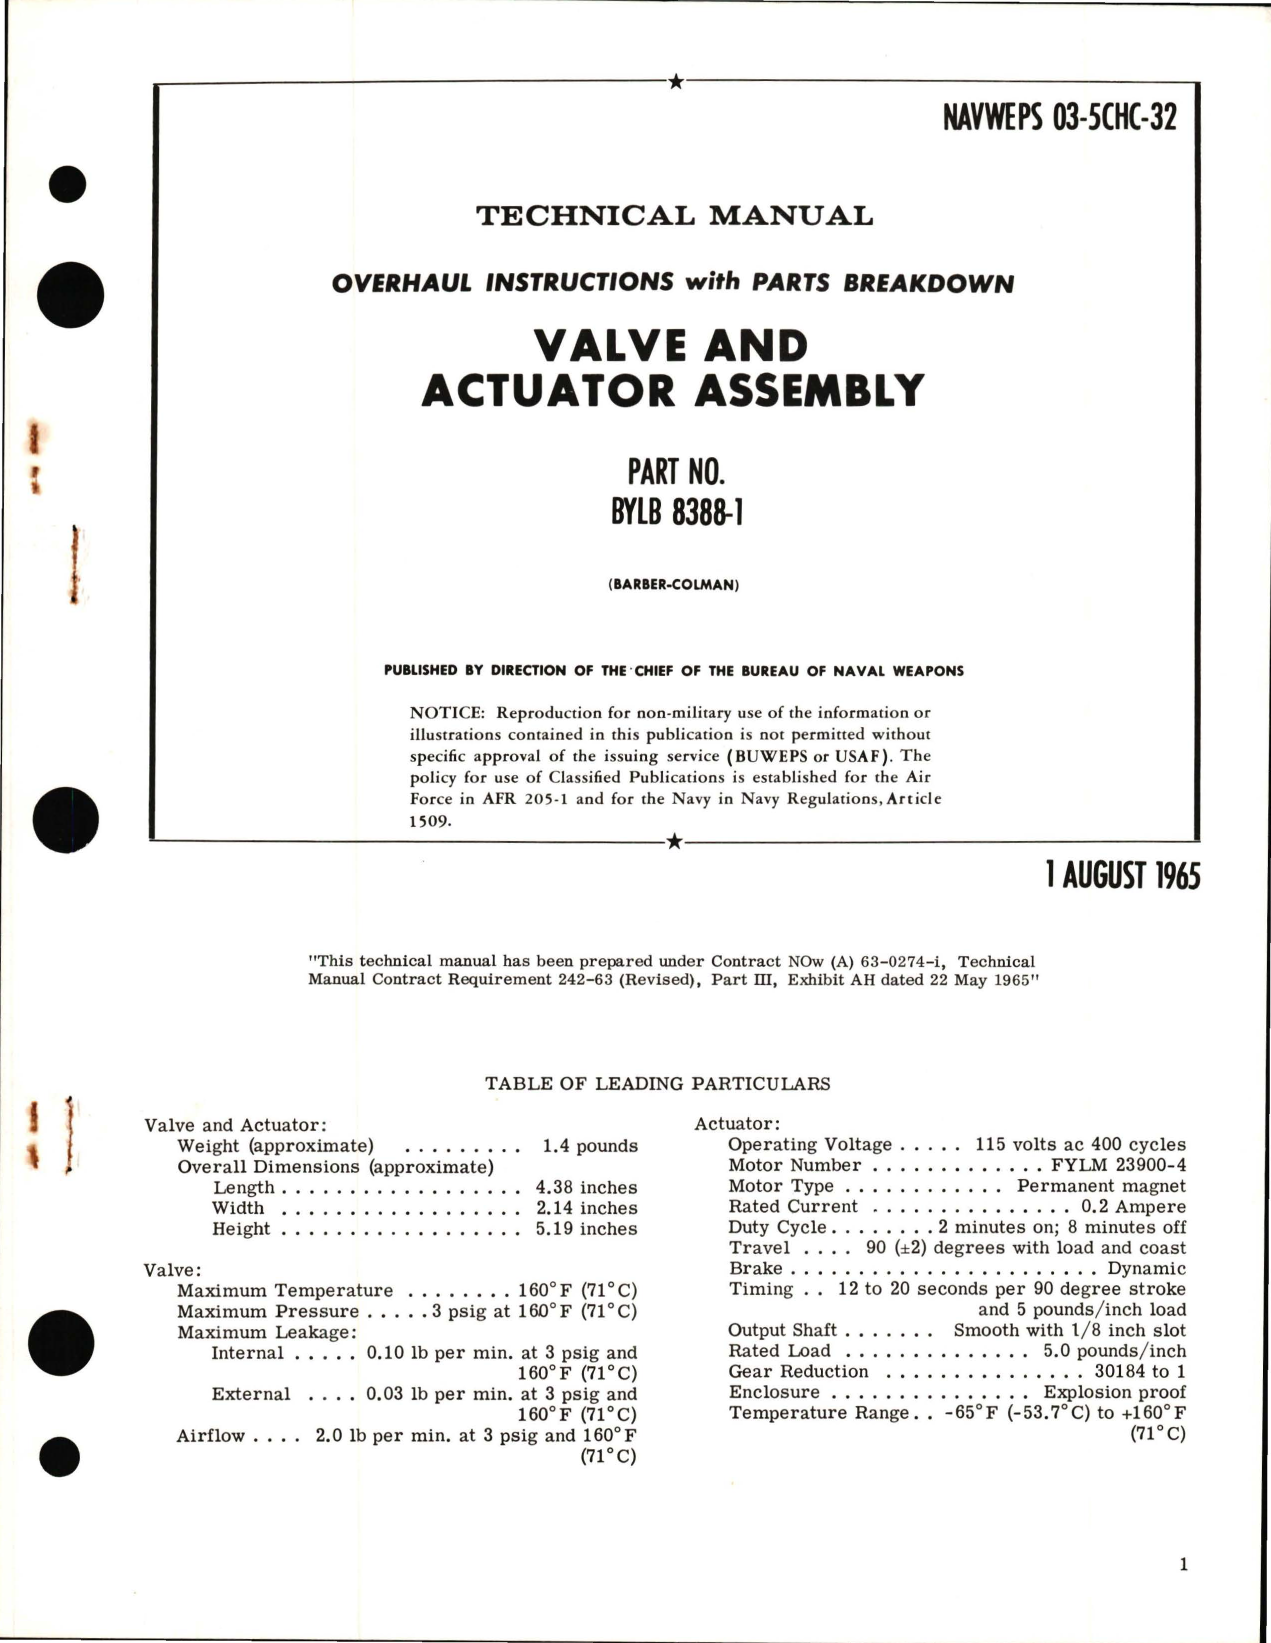 Sample page 1 from AirCorps Library document: Overhaul Instructions with Parts Breakdown for Valve and Actuator Assembly - Part BYLB 8388-1 